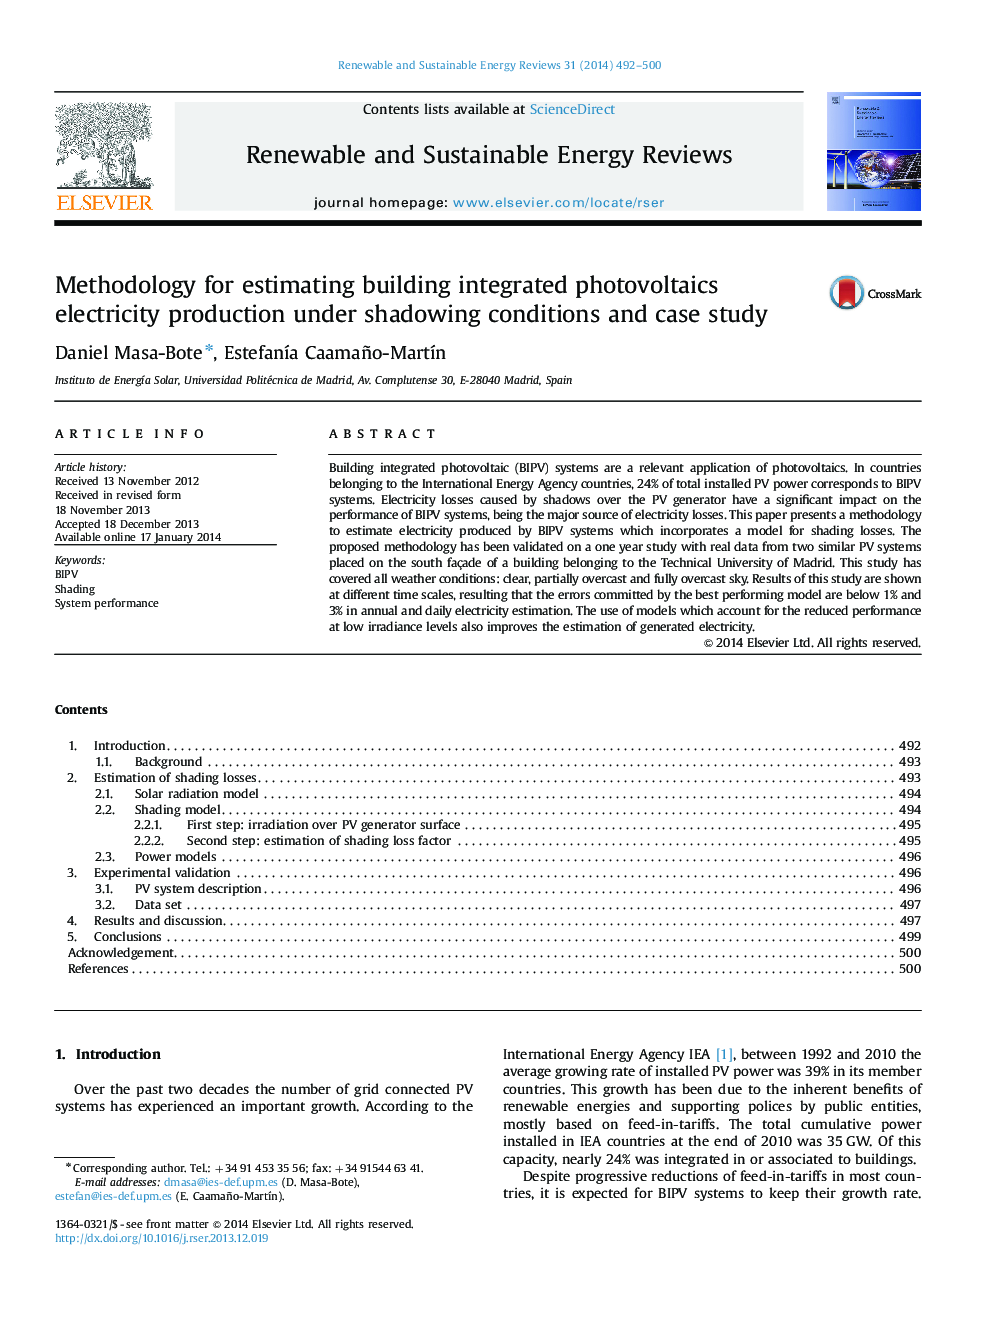 Methodology for estimating building integrated photovoltaics electricity production under shadowing conditions and case study